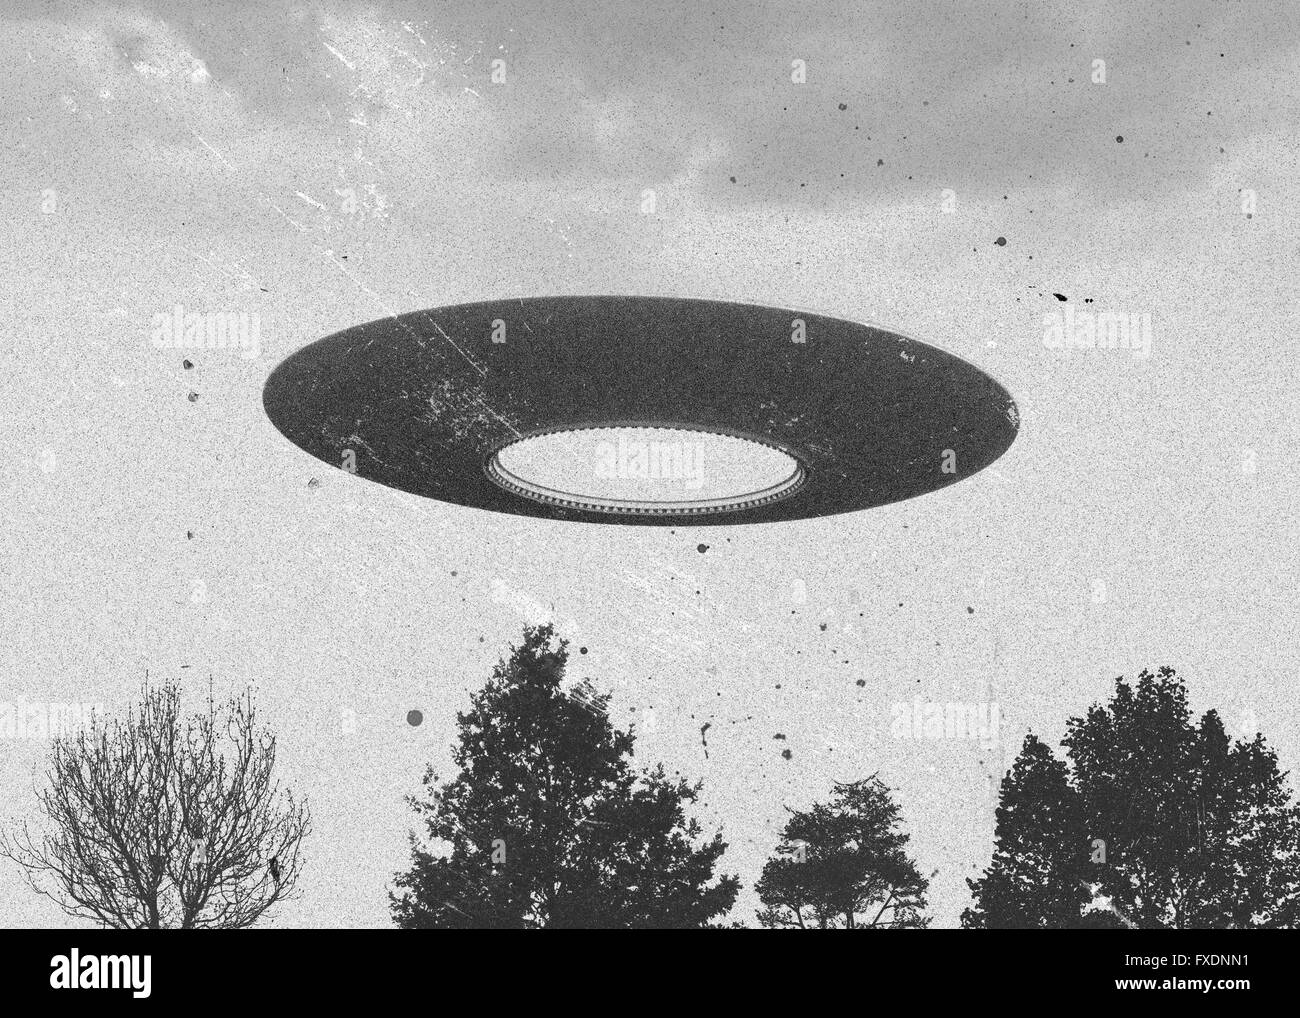 3d rendering of flying saucer ufo vintage style Stock Photo